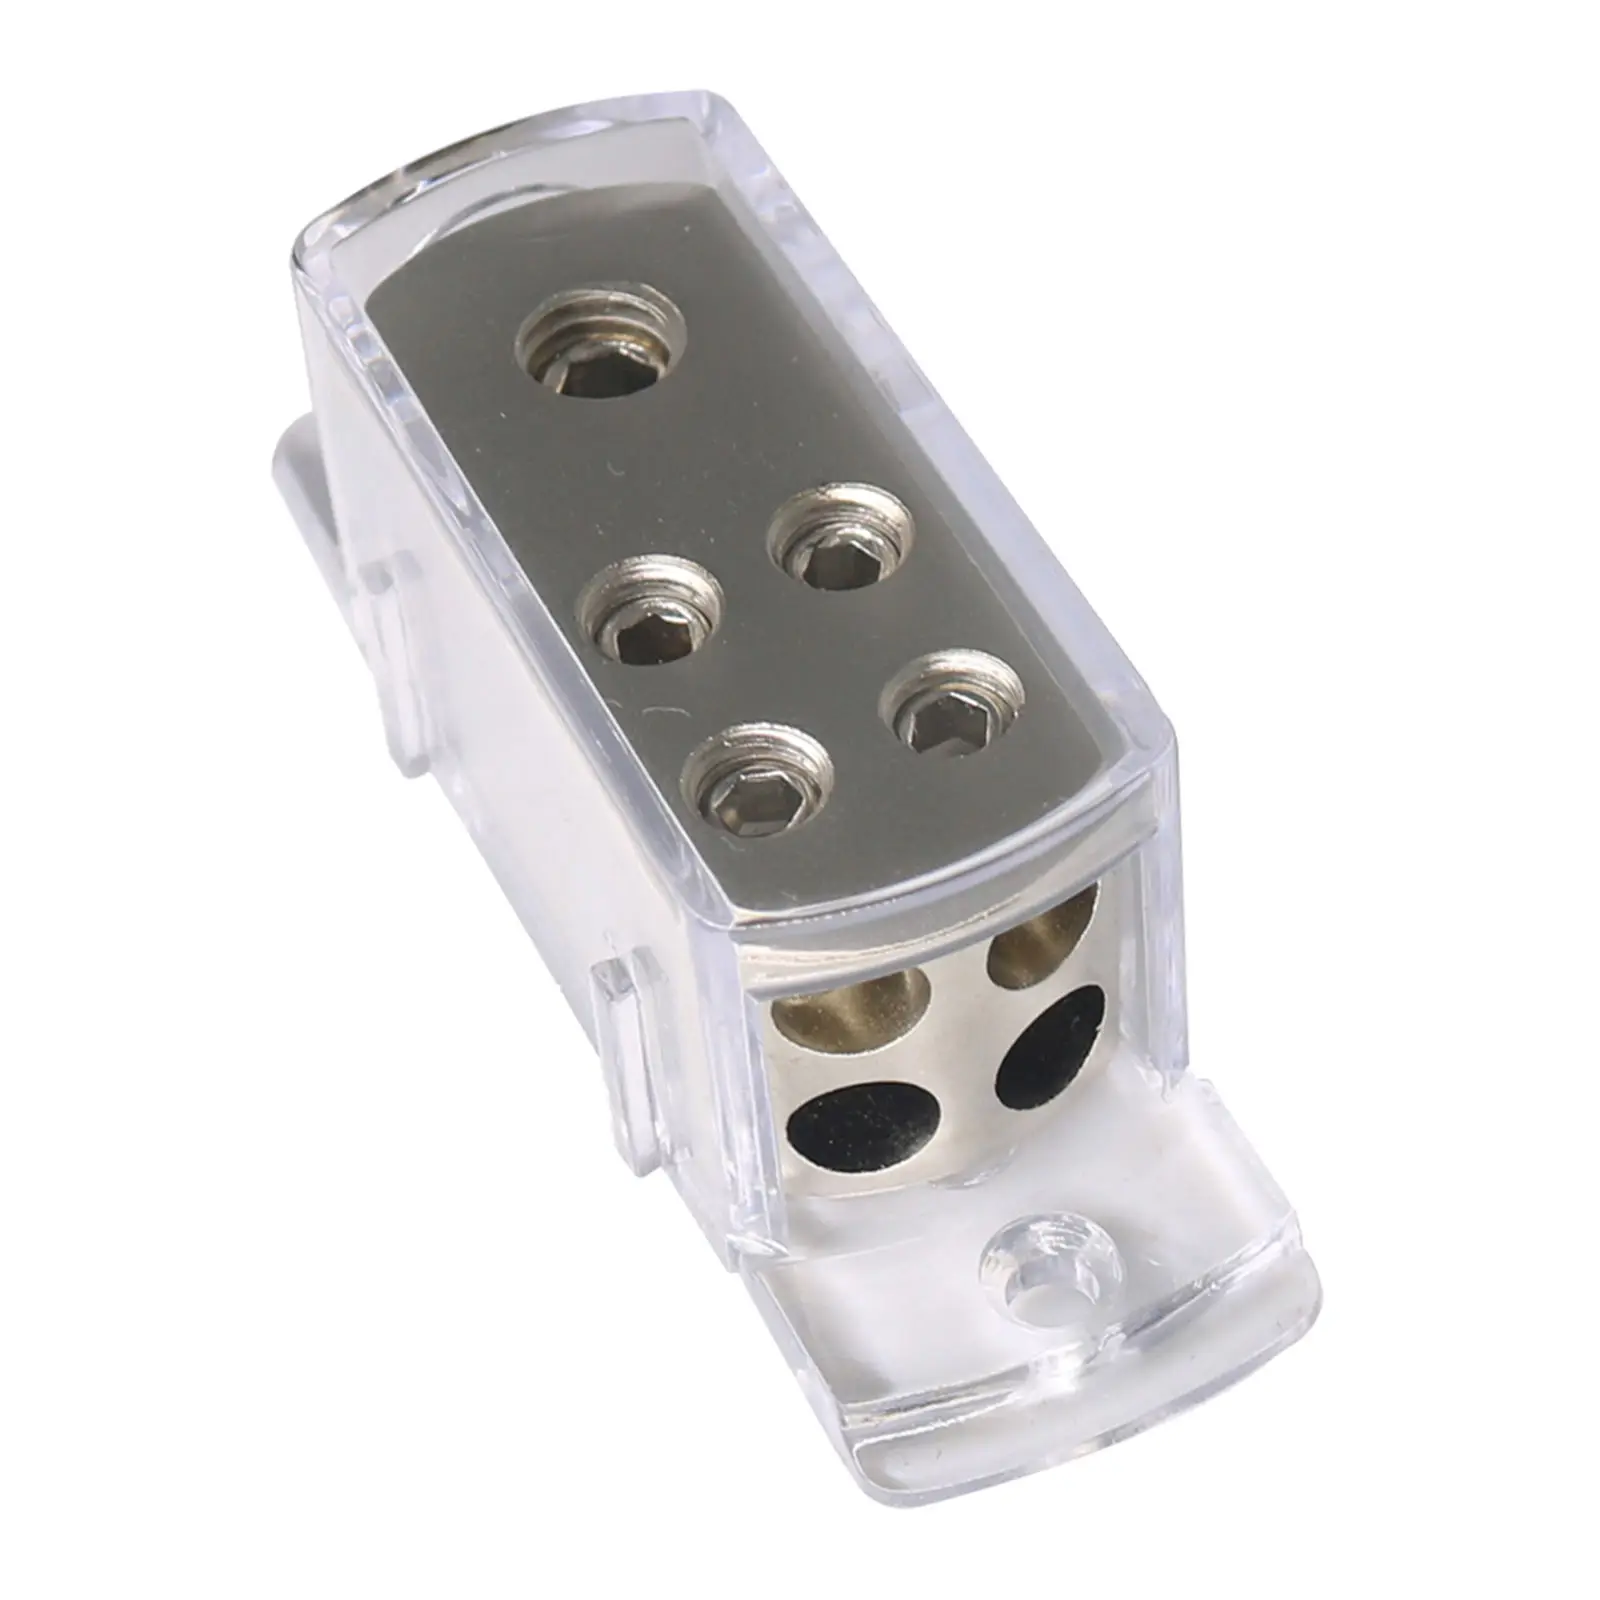 4-Way 1X 4AWG In 4X 8AWG Out Power/Ground Cable Splitter Distribution Block